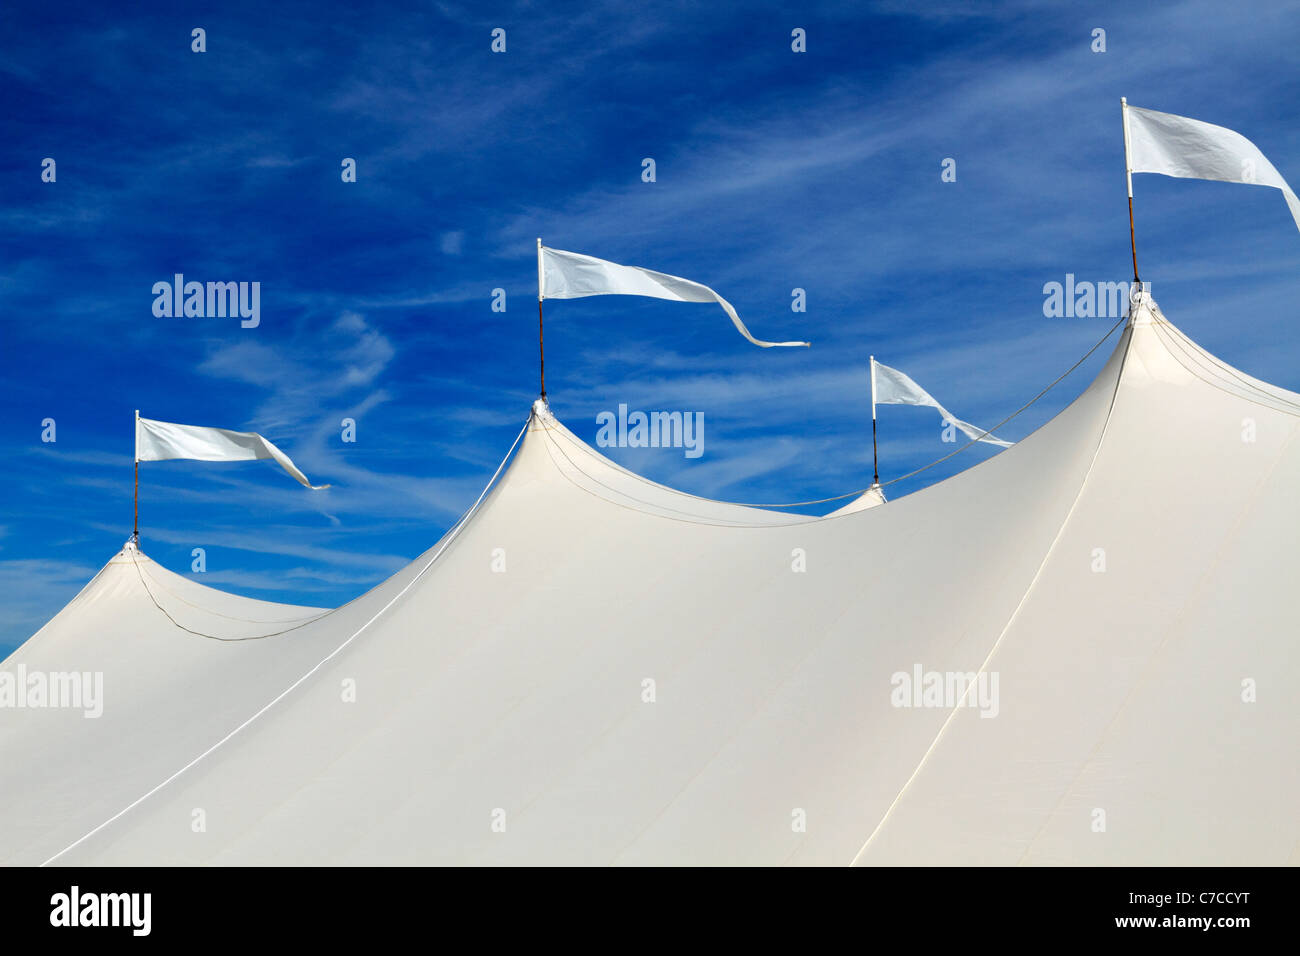 The top of a large event white event tent in front of a blue sky. On the beach in Long Branch, New Jersey, USA Stock Photo